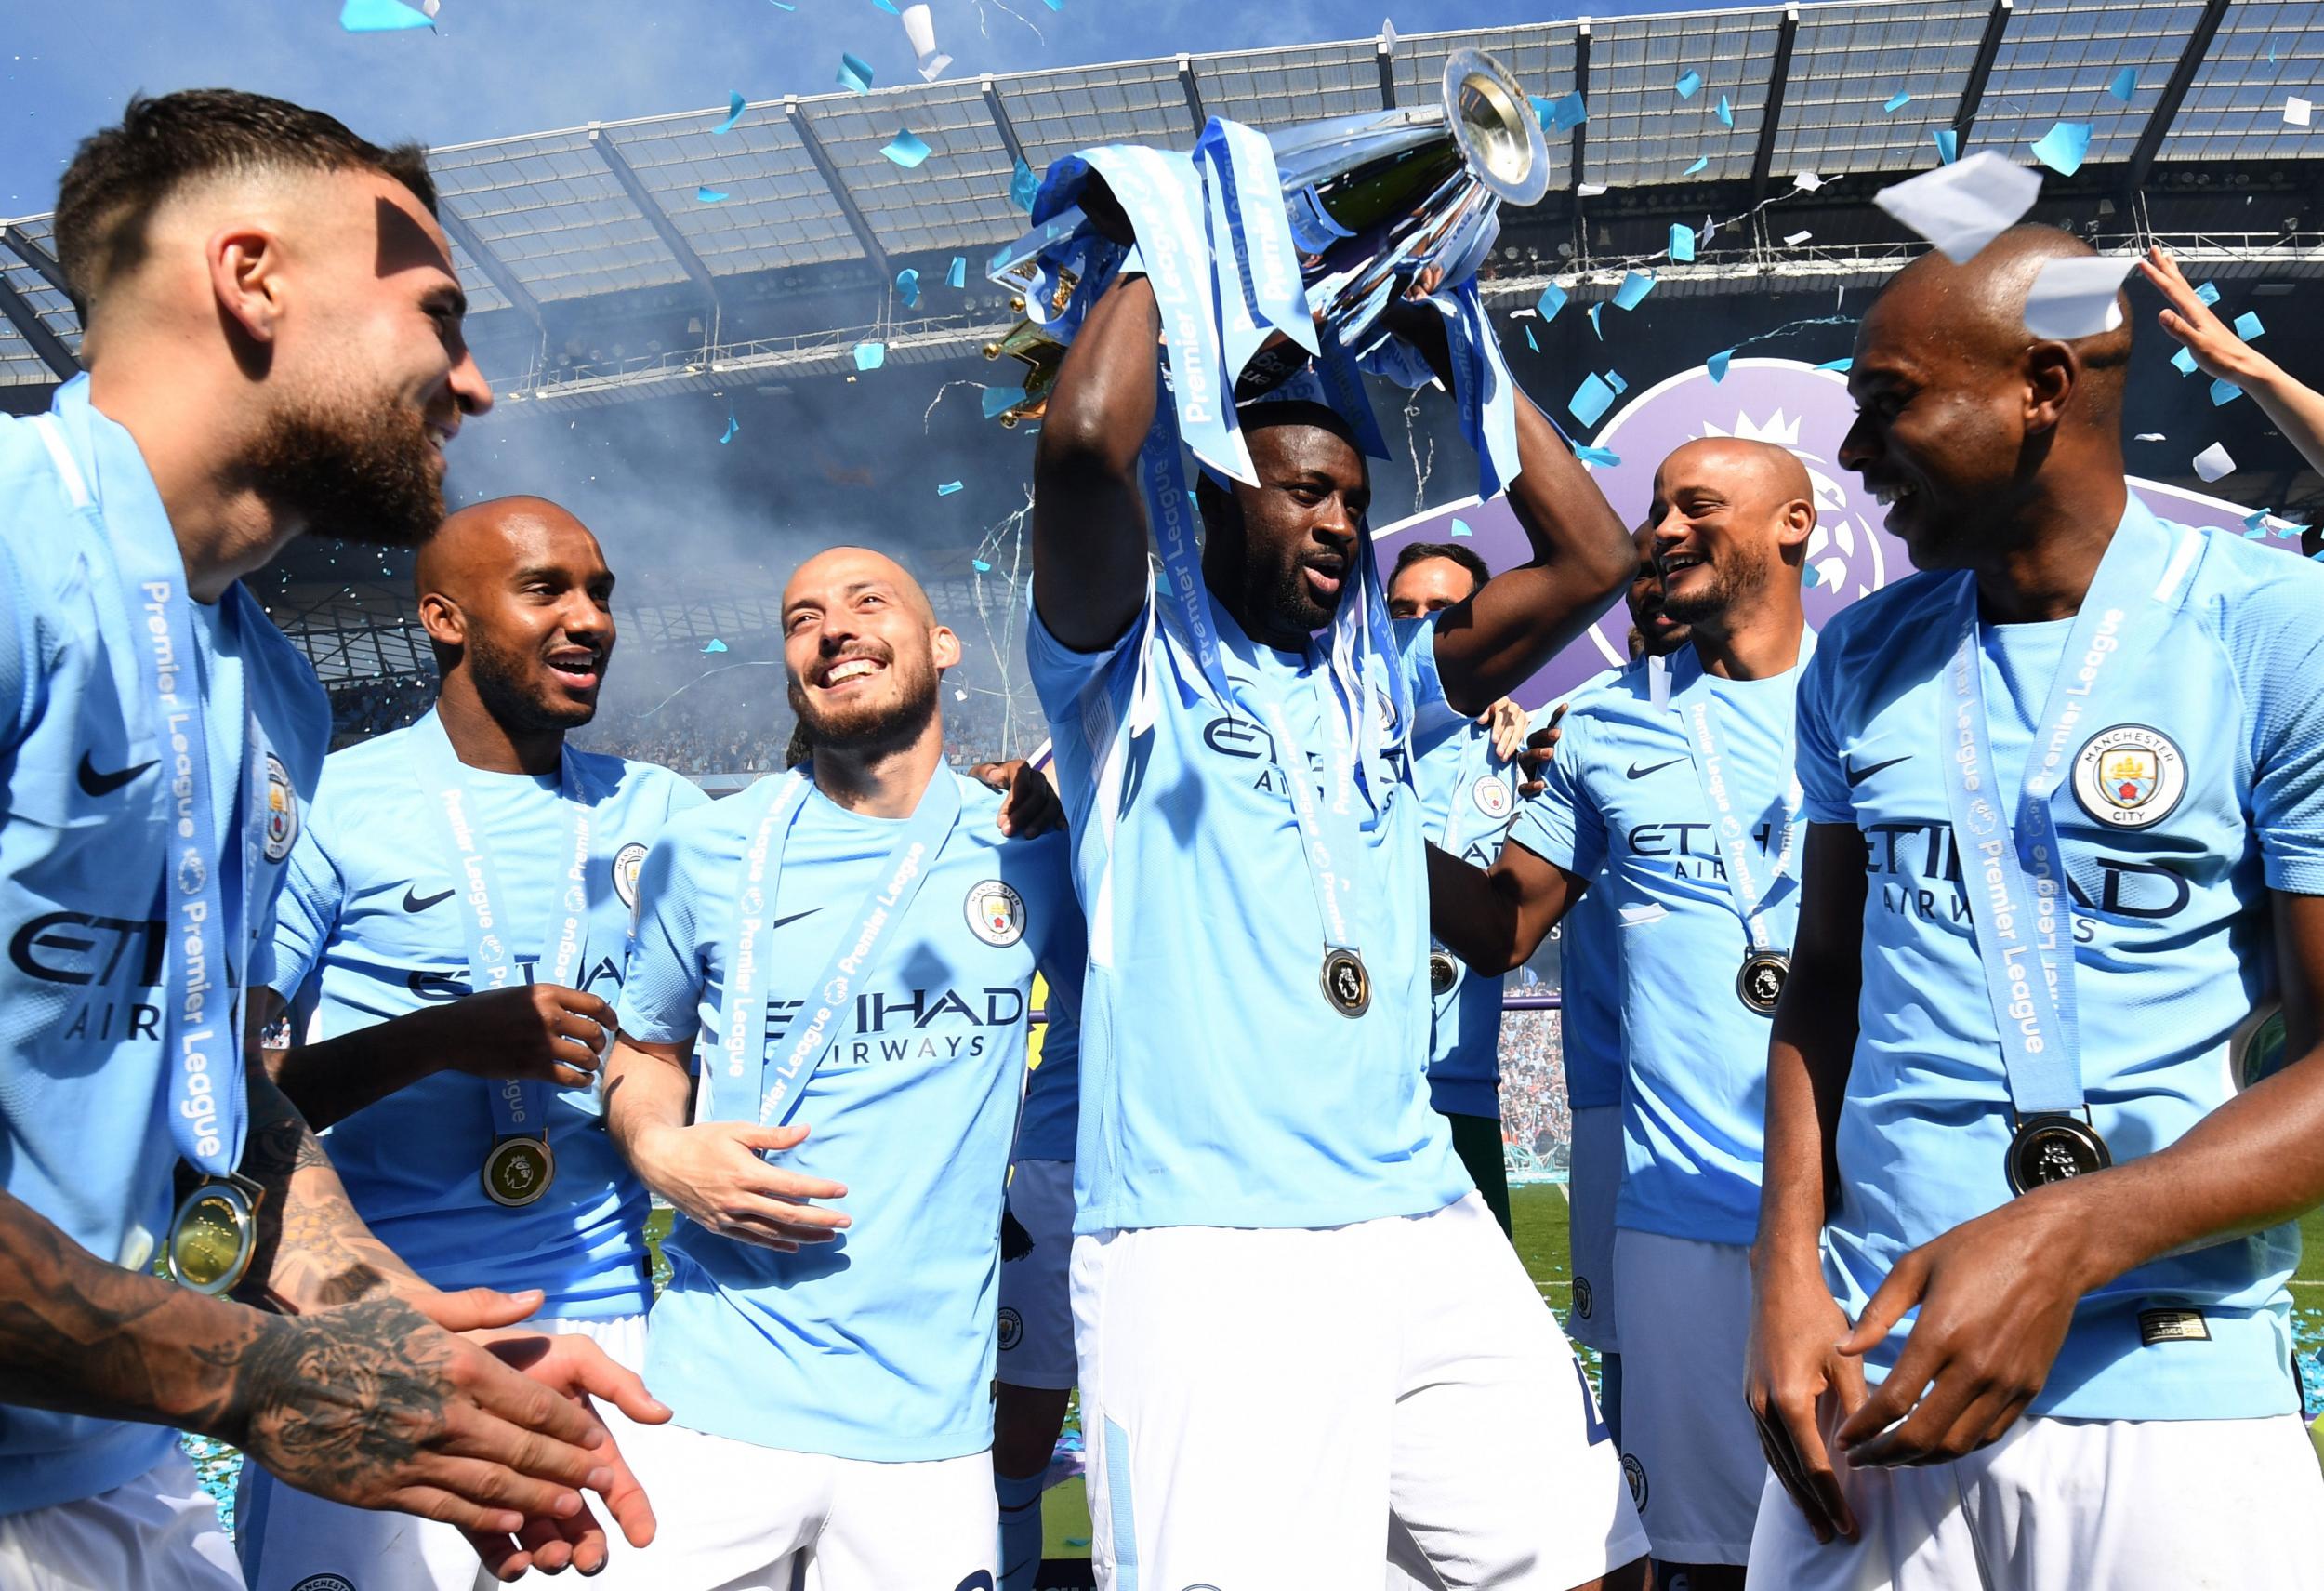 Yaya Touré celebrated Manchester City's title win after Sunday's draw with Huddersfield